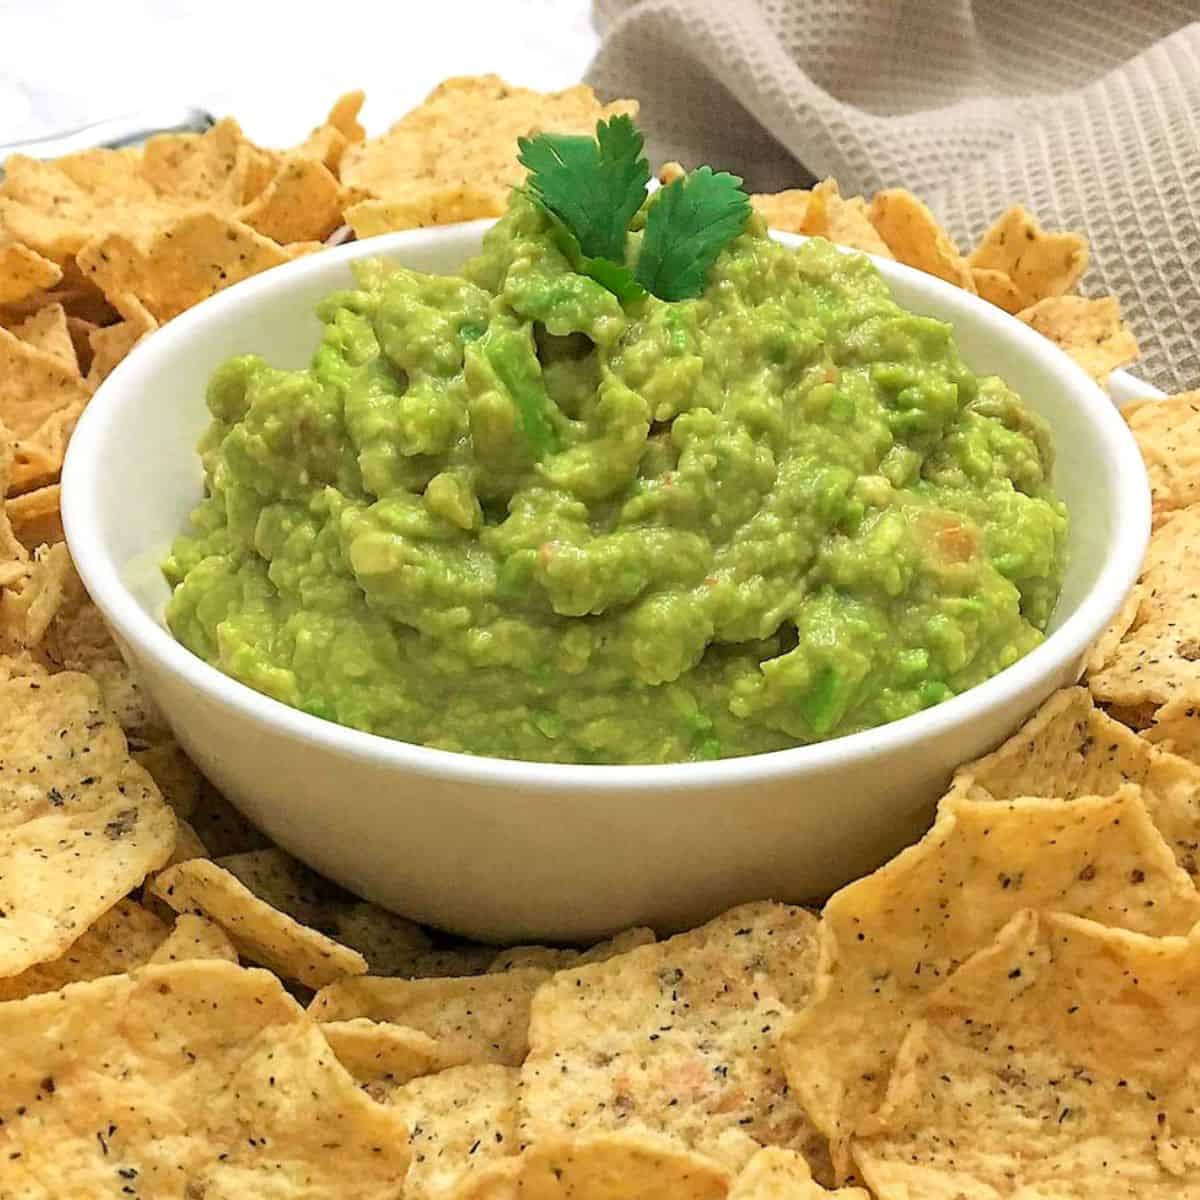 Bowl of guacamole with tortilla chips all around it.